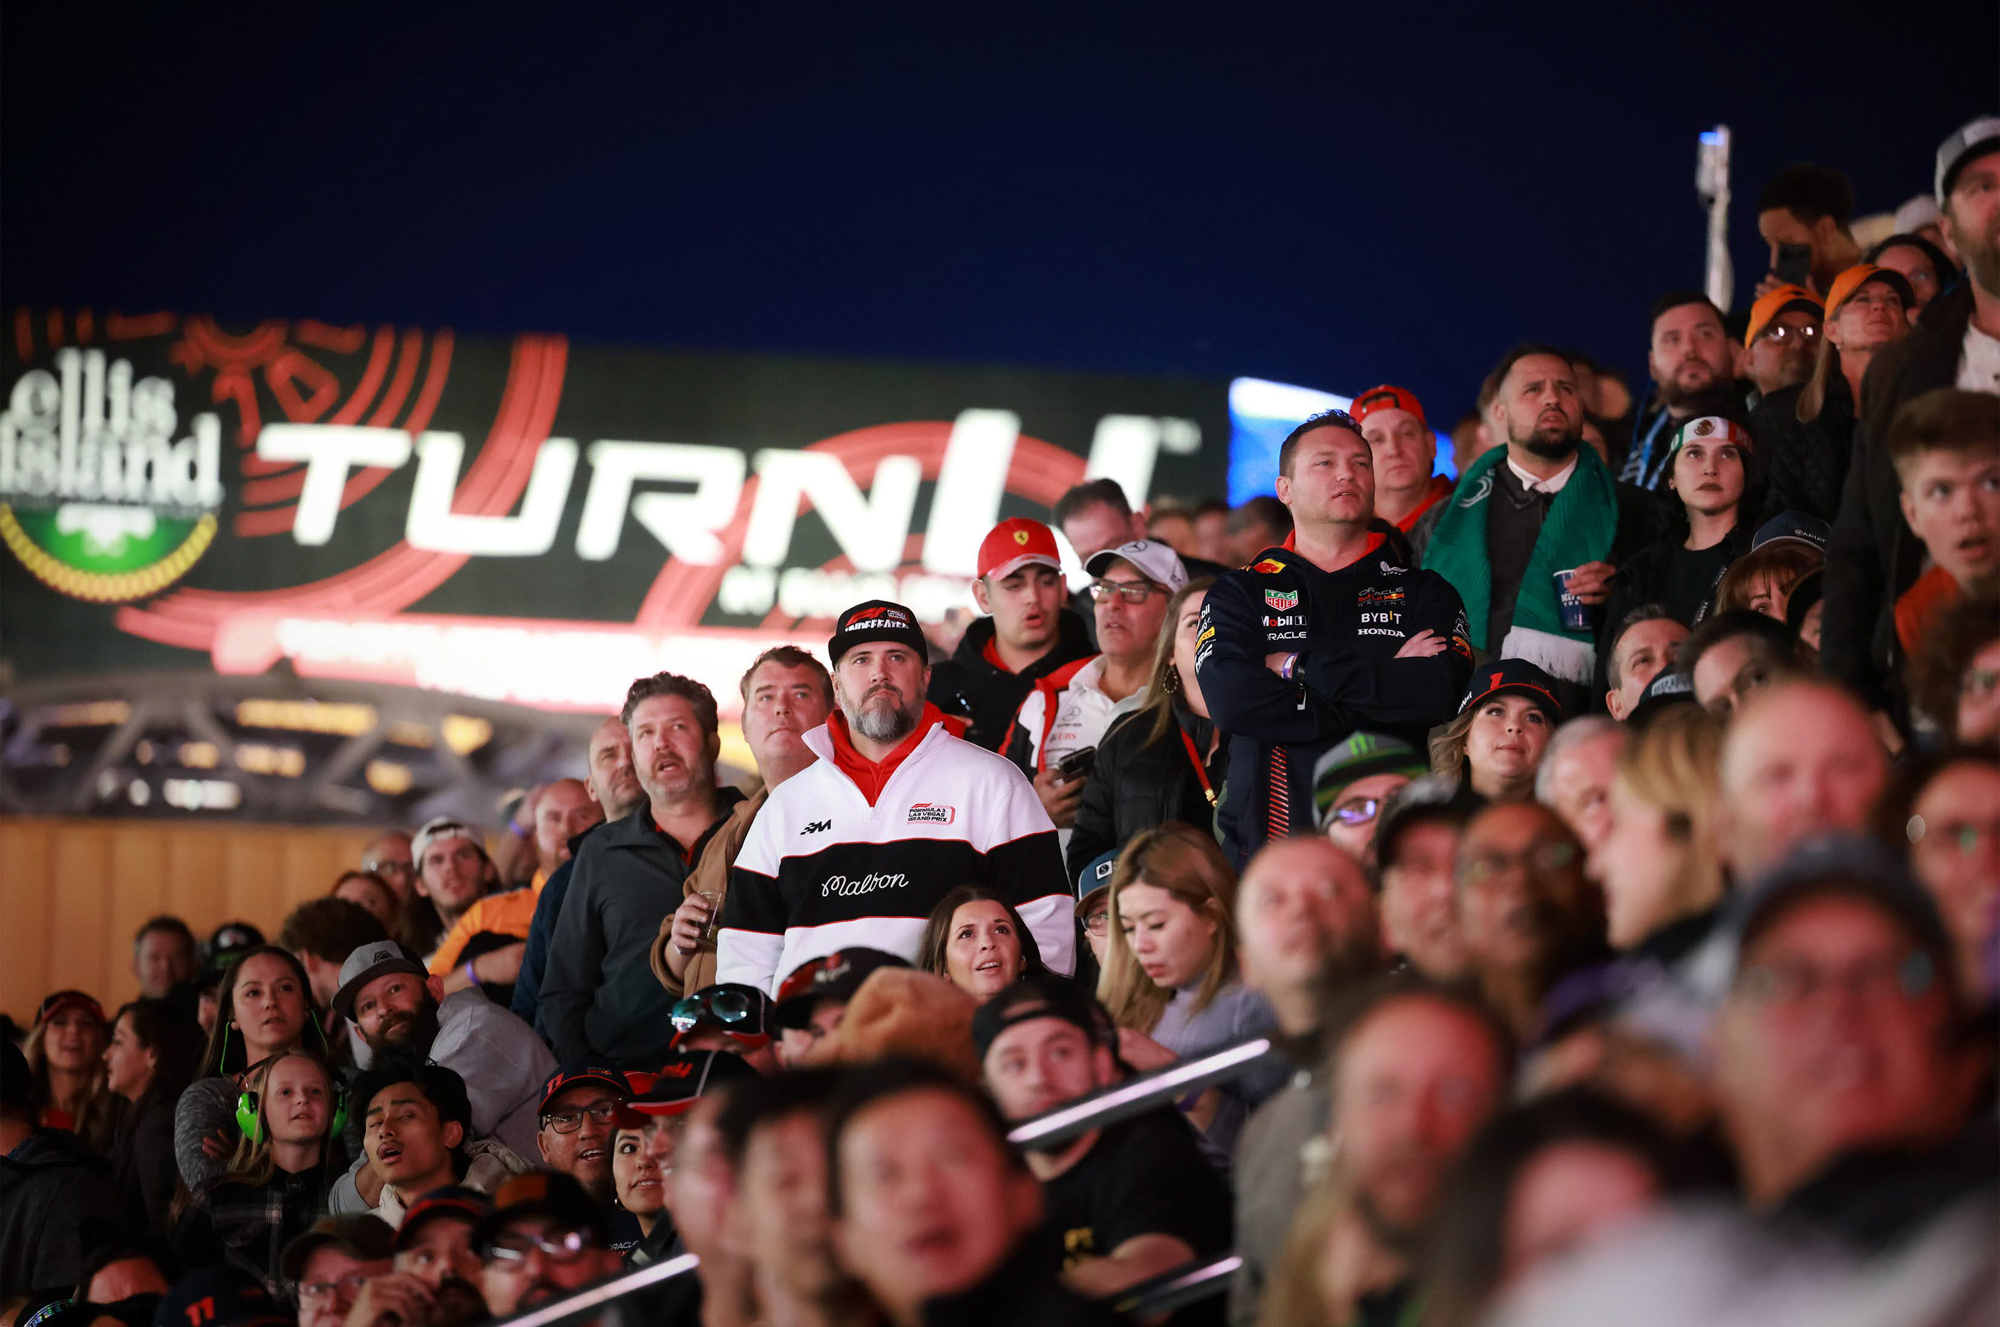 With Las Vegas F1 tickets costing thousands, who will fill the grandstands?  - The Nevada Independent